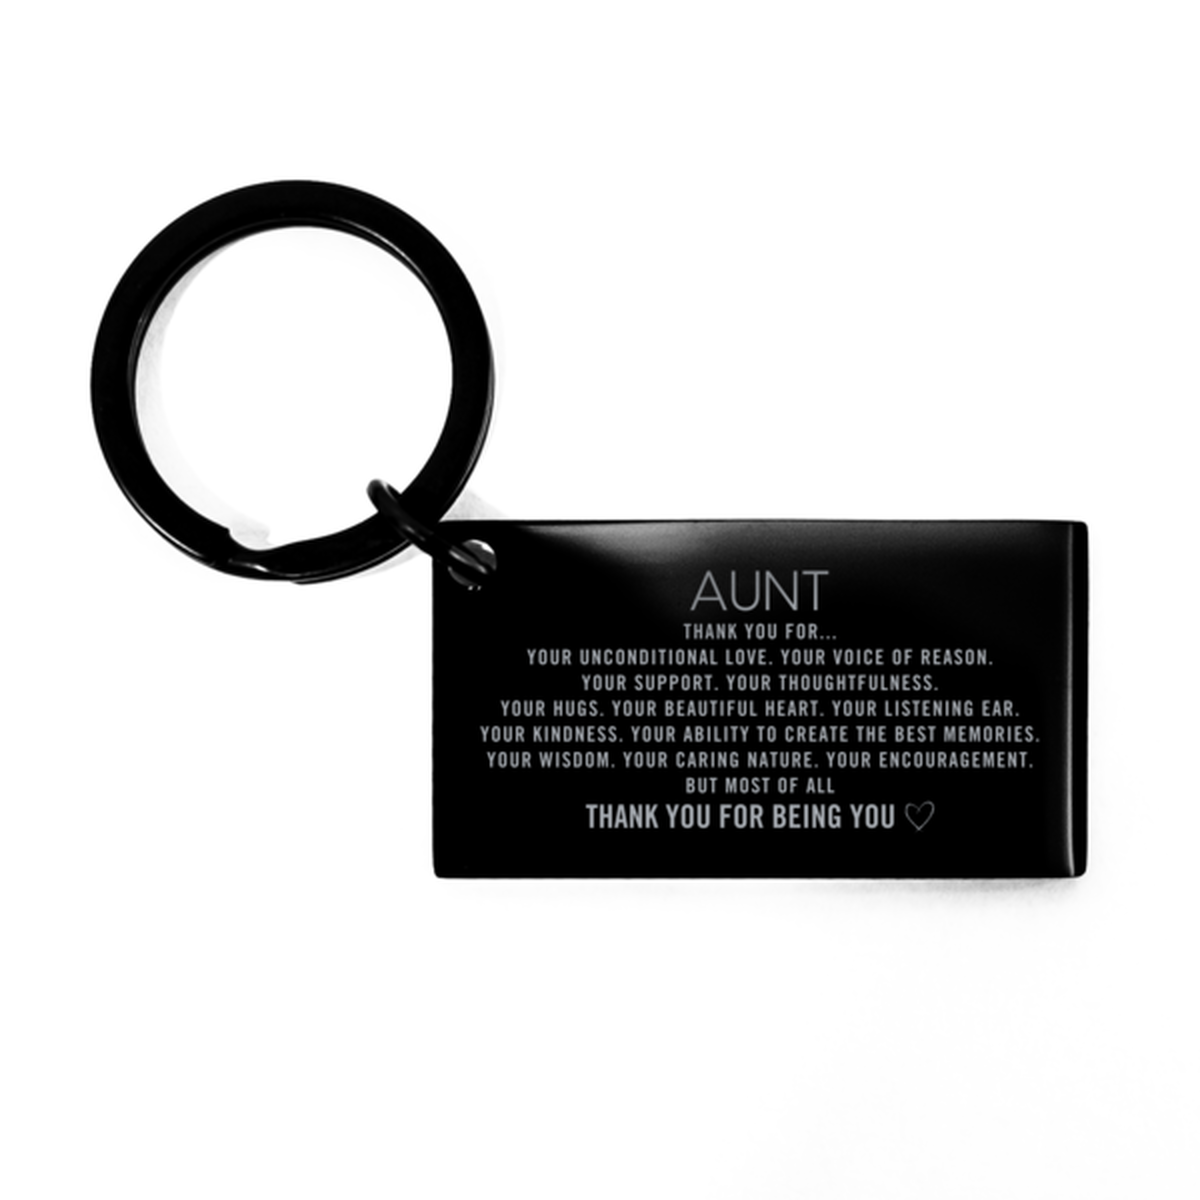 Aunt Keychain Custom, Engraved Gifts For Aunt Christmas Graduation Birthday Gifts for Men Women Aunt Thank you for Your unconditional love